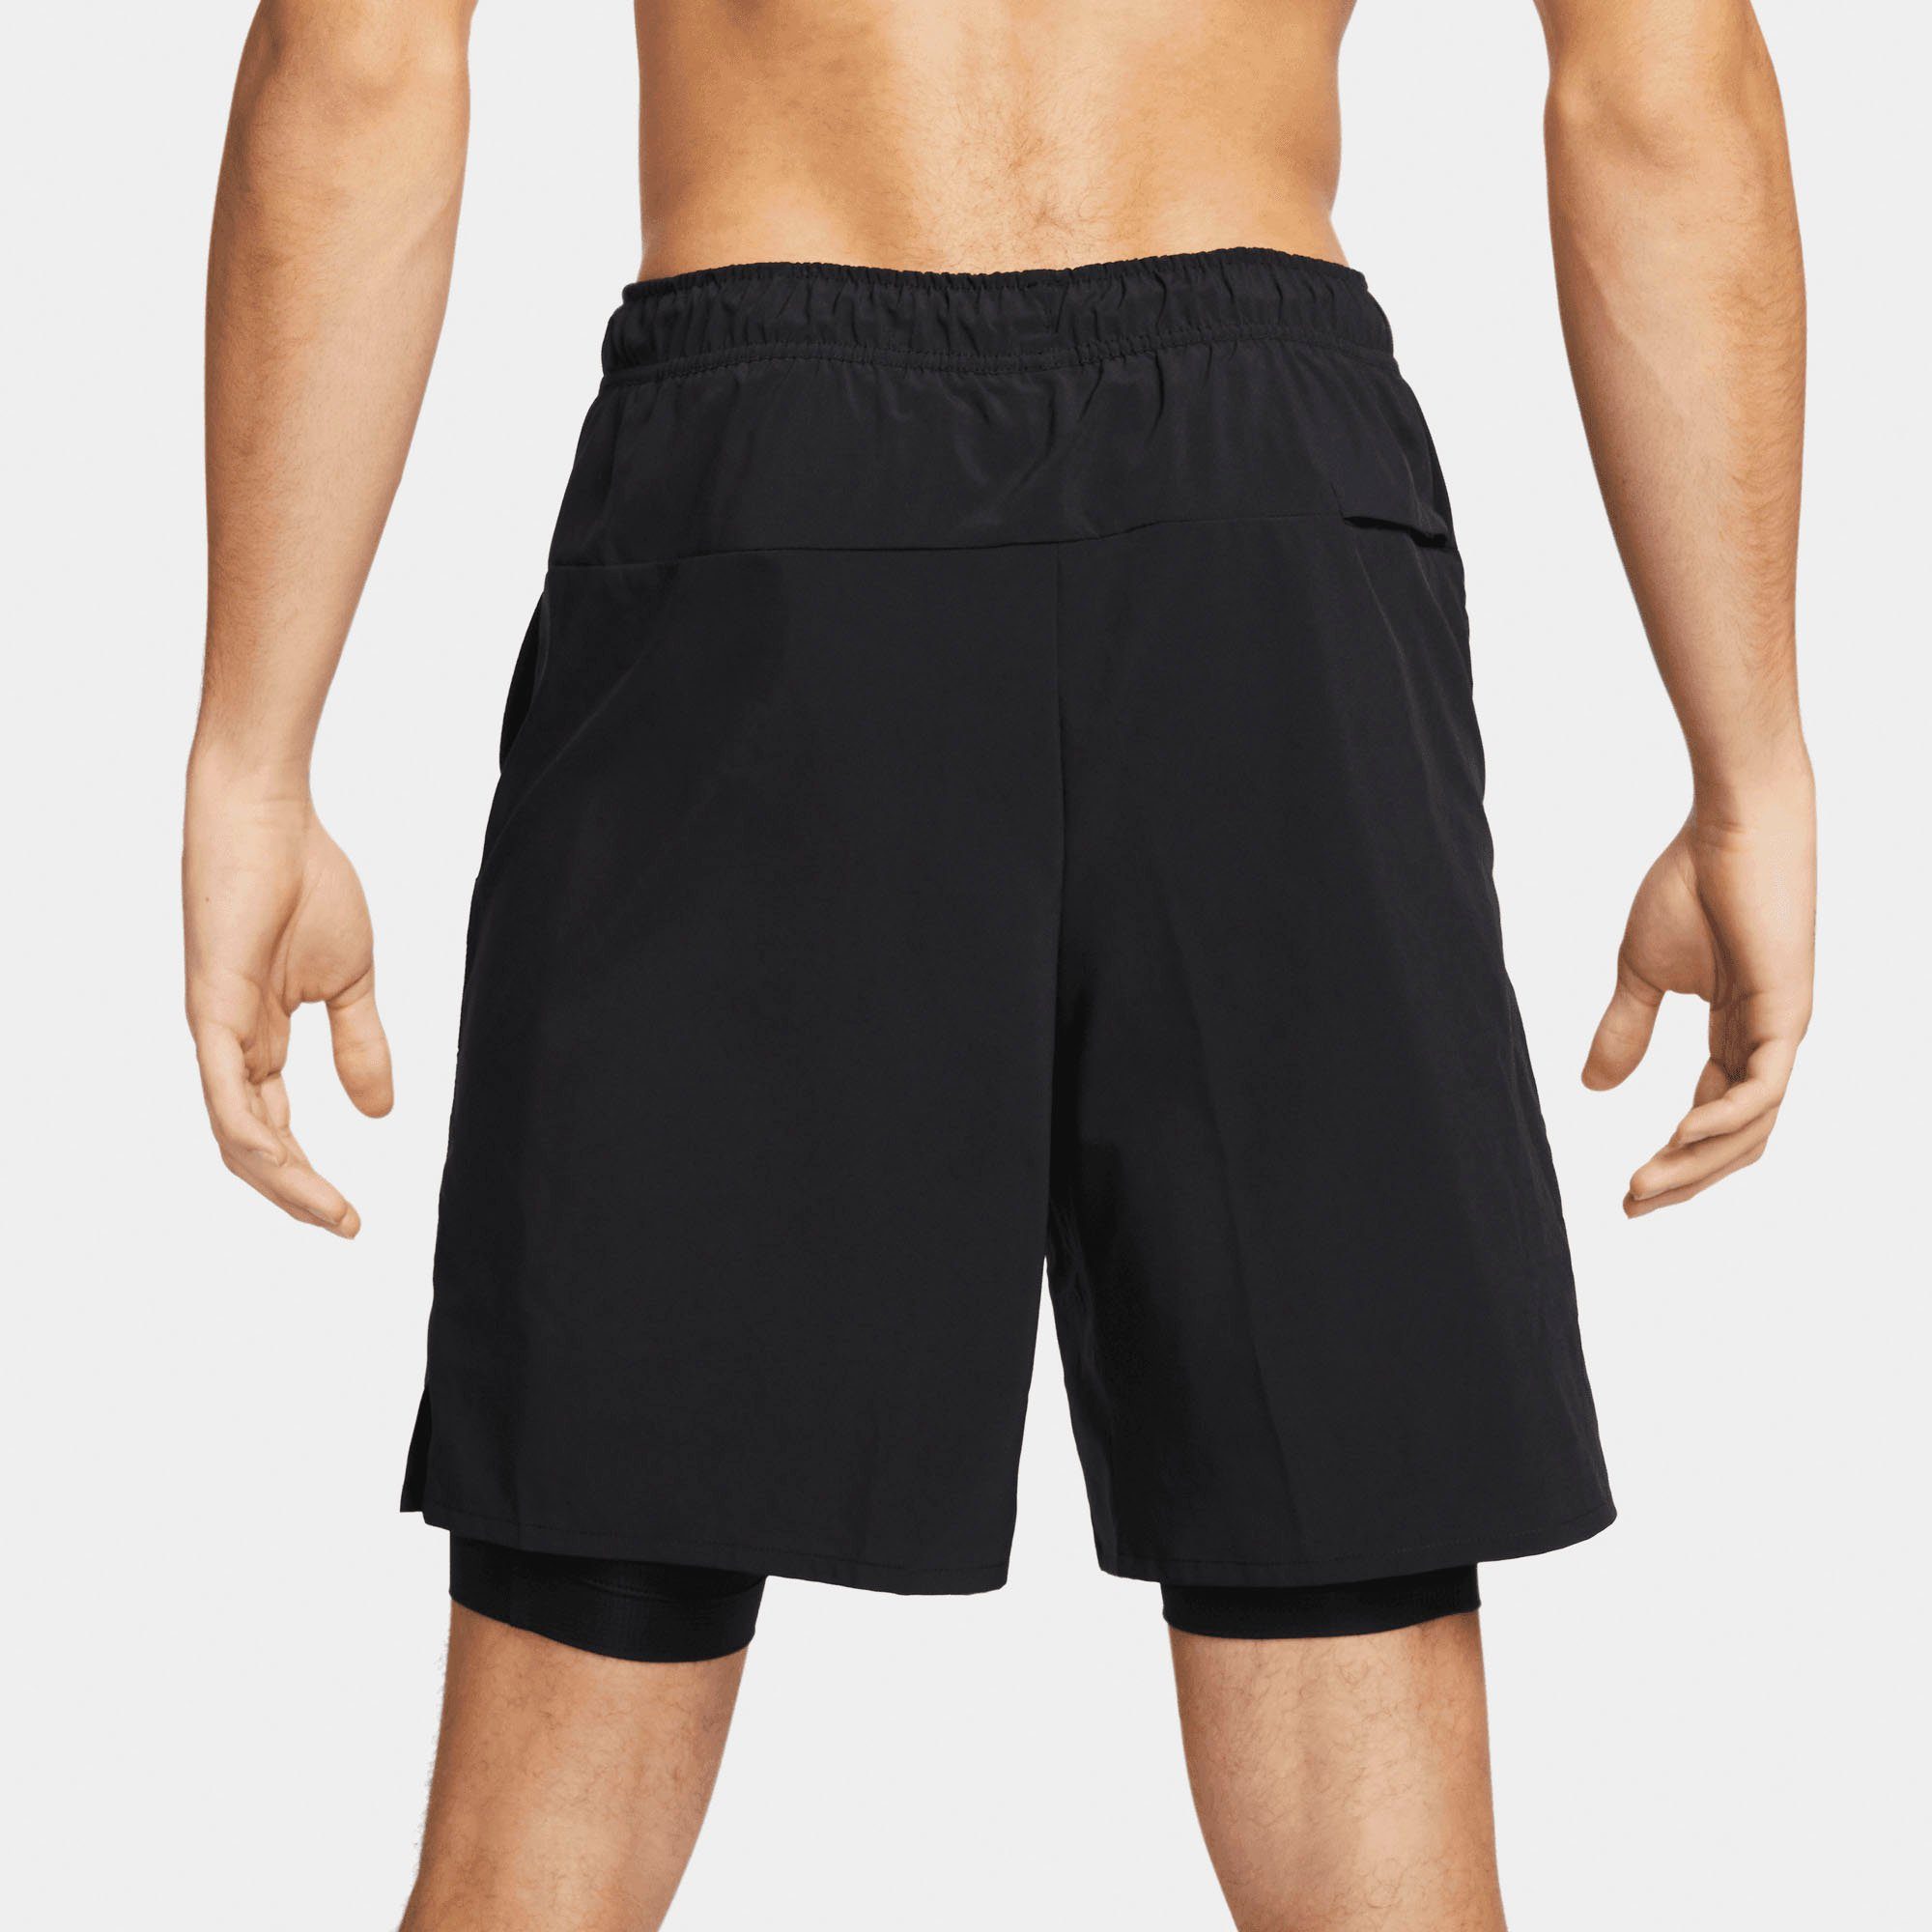 Men's Nike -in-1 Trainingsshorts " Unlimited Woven Shorts Fitness Dri-FIT